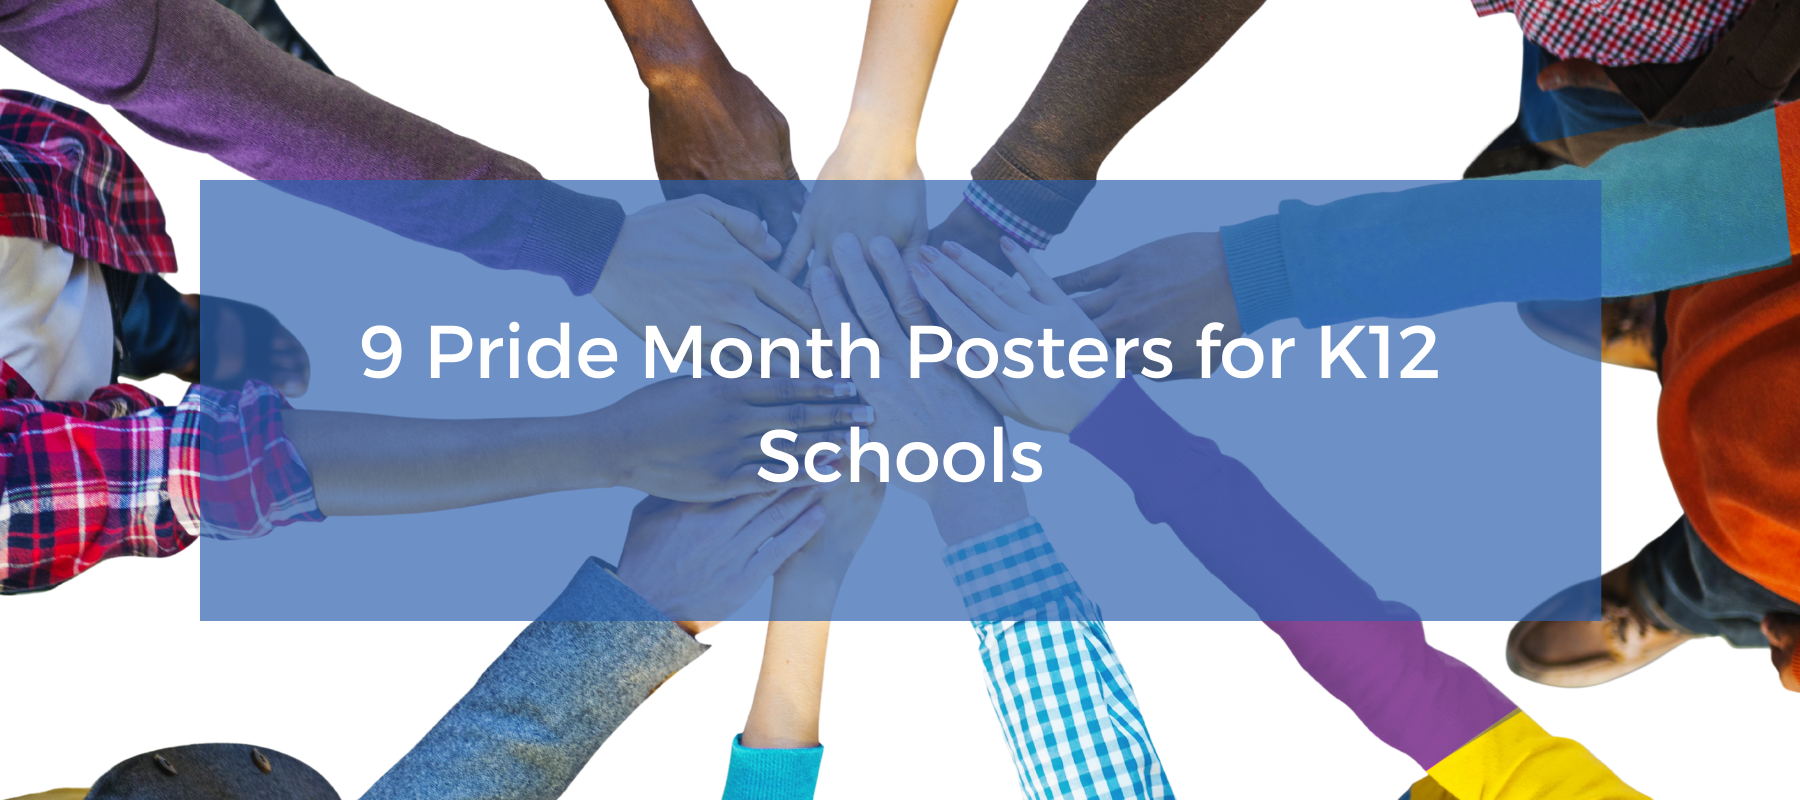 Pride Month Posters for K12 Schools